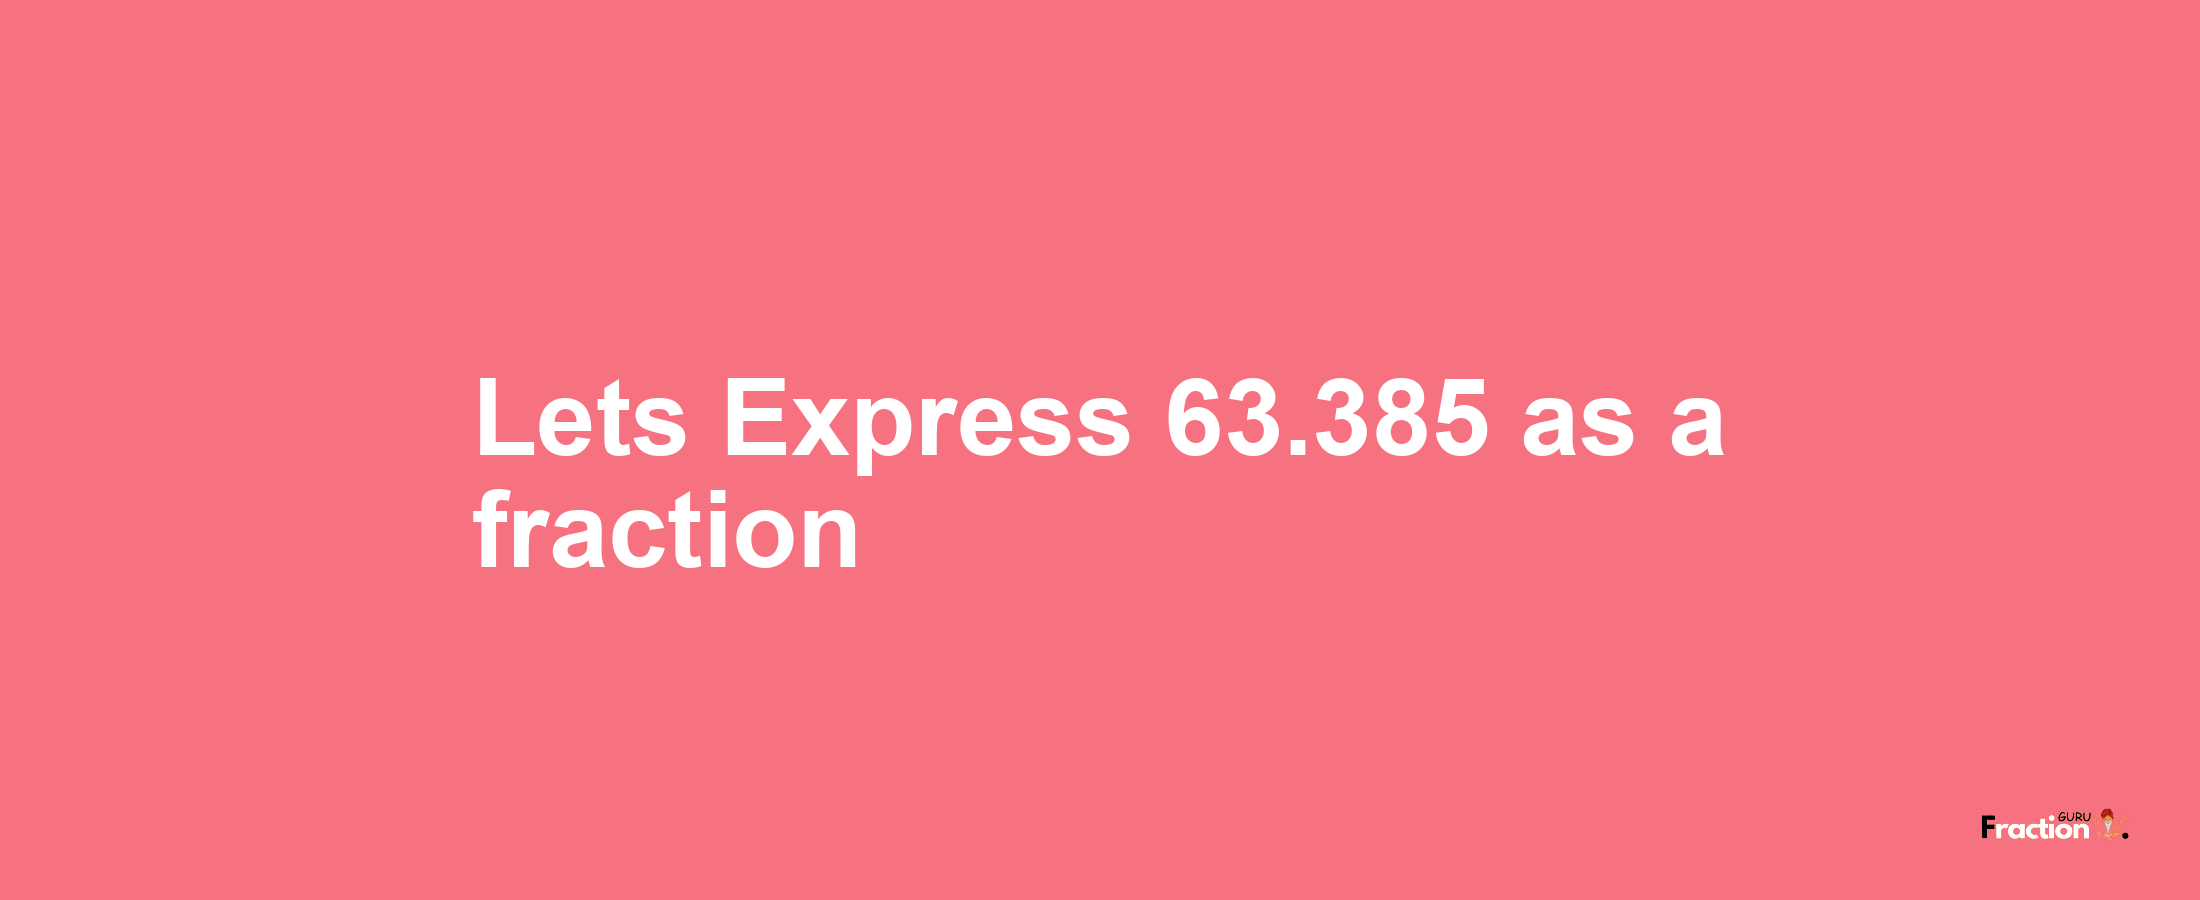 Lets Express 63.385 as afraction